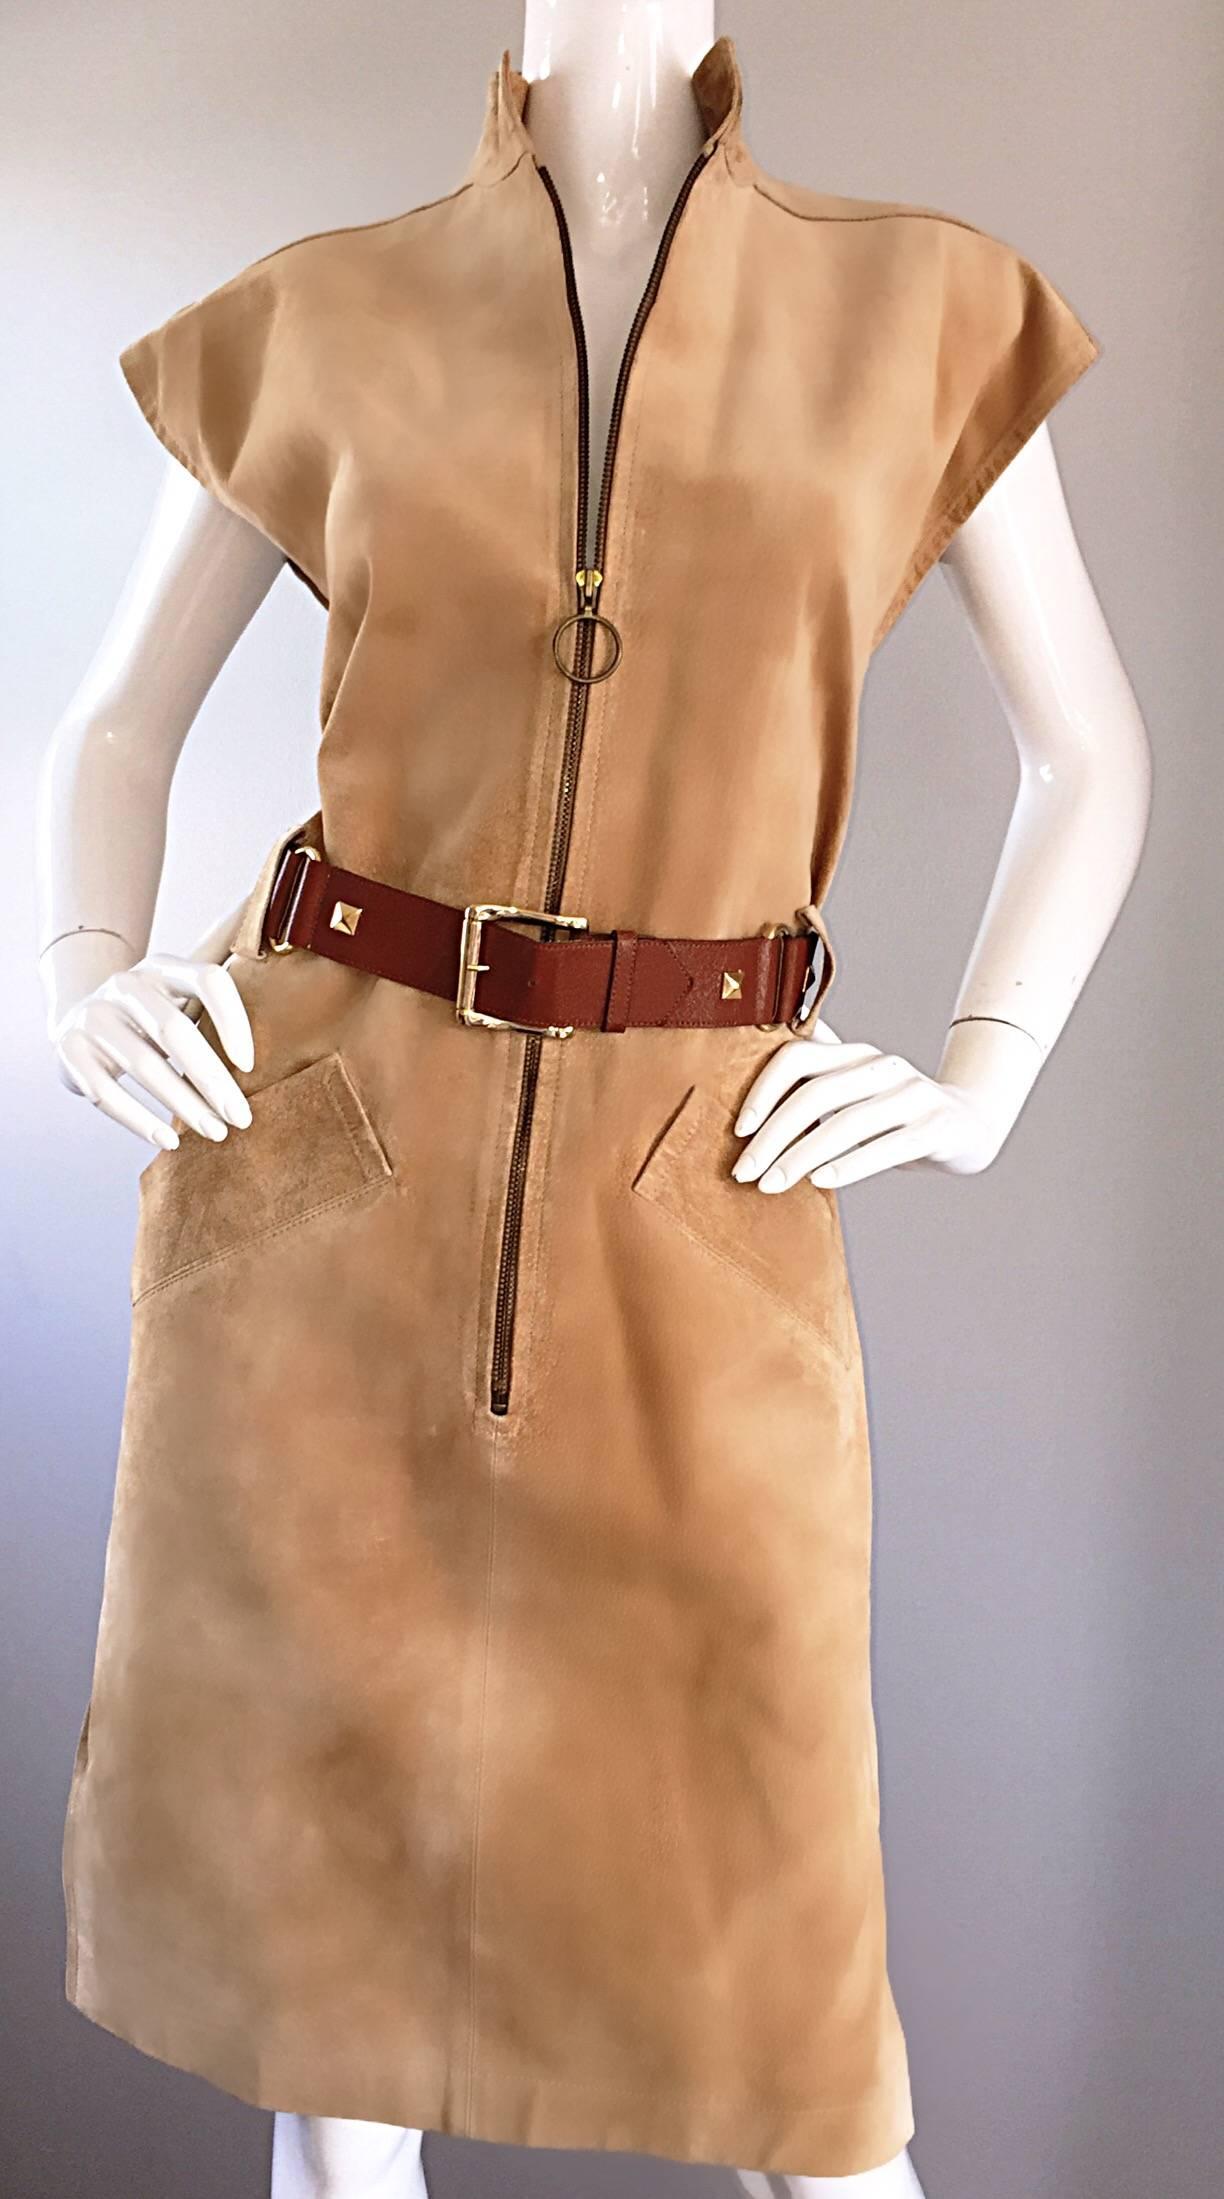 YSL Yves Saint Laurent Rive Gauche 1960s Vintage Leather Suede Tan Belted Dress 5